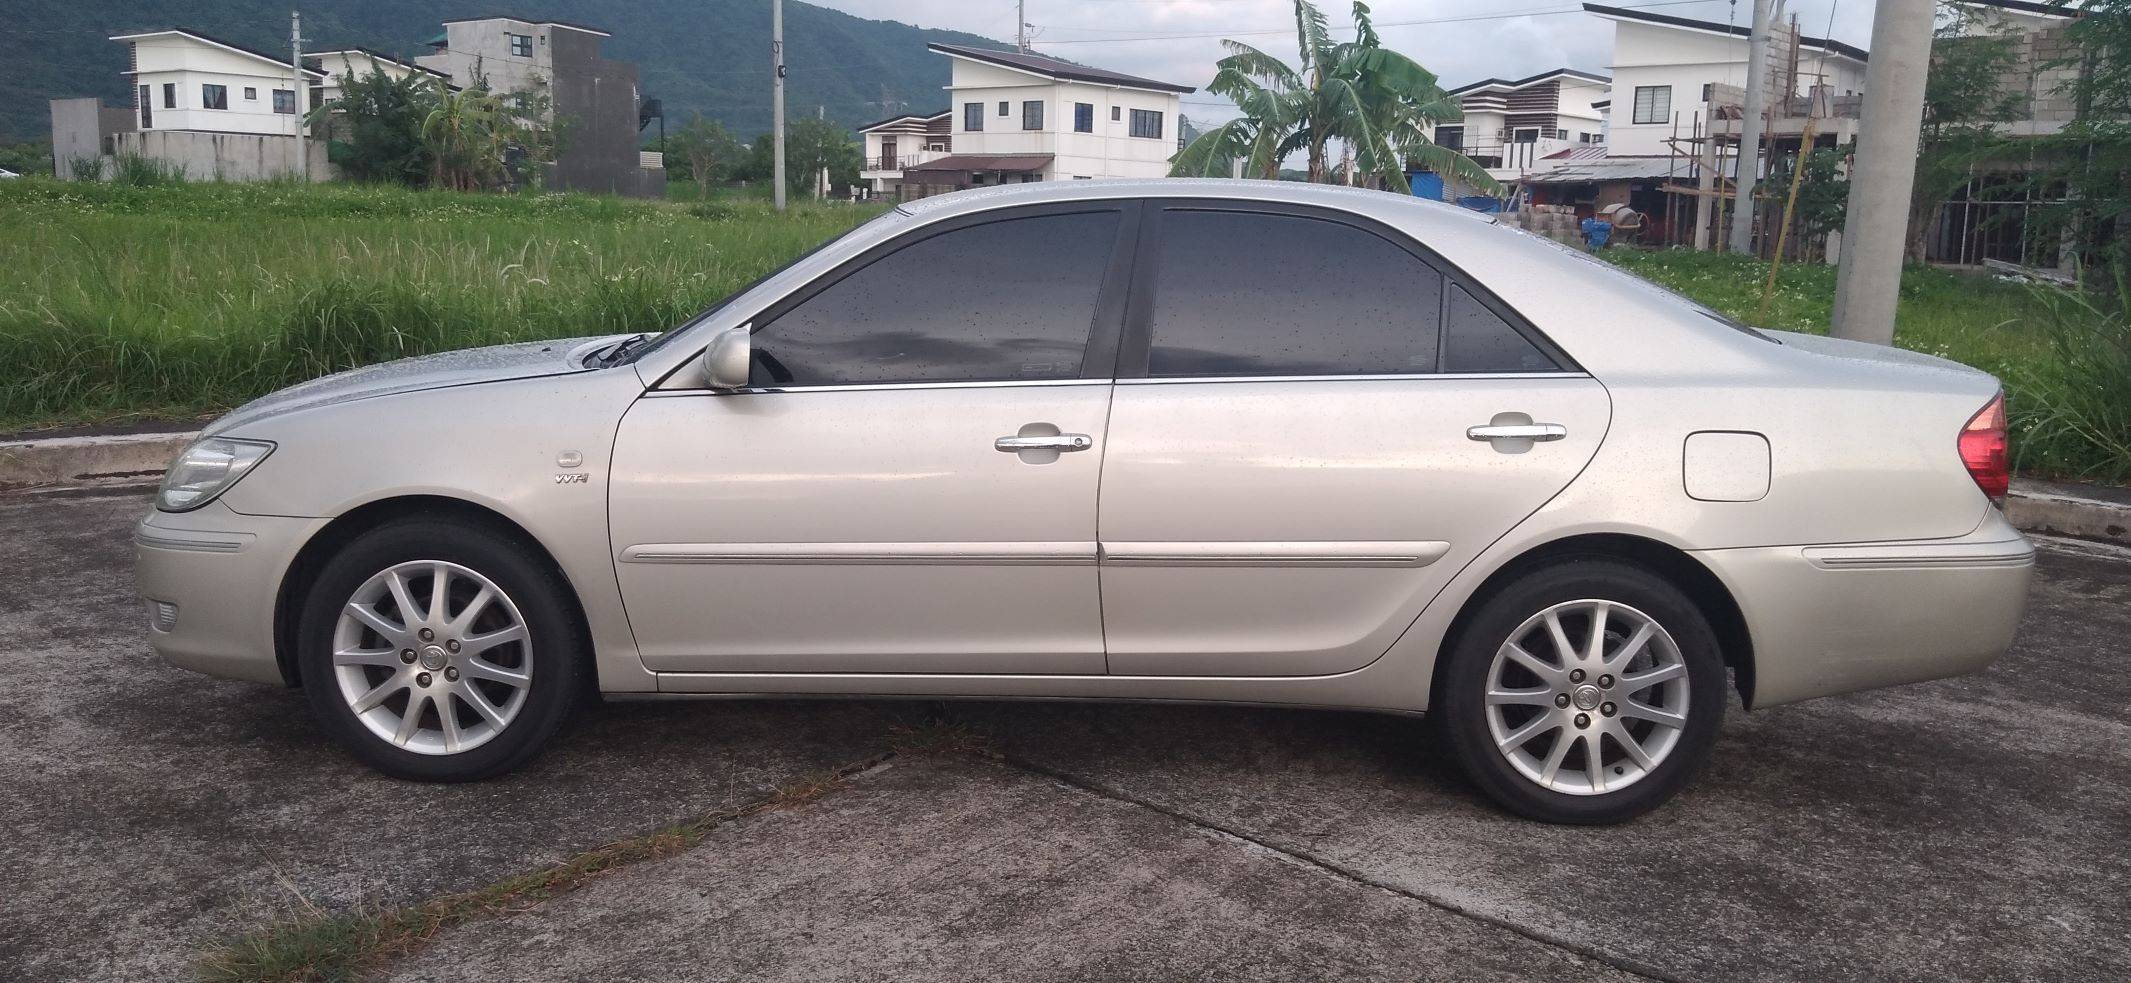 2nd Hand 2004 Toyota Camry 3.0L V